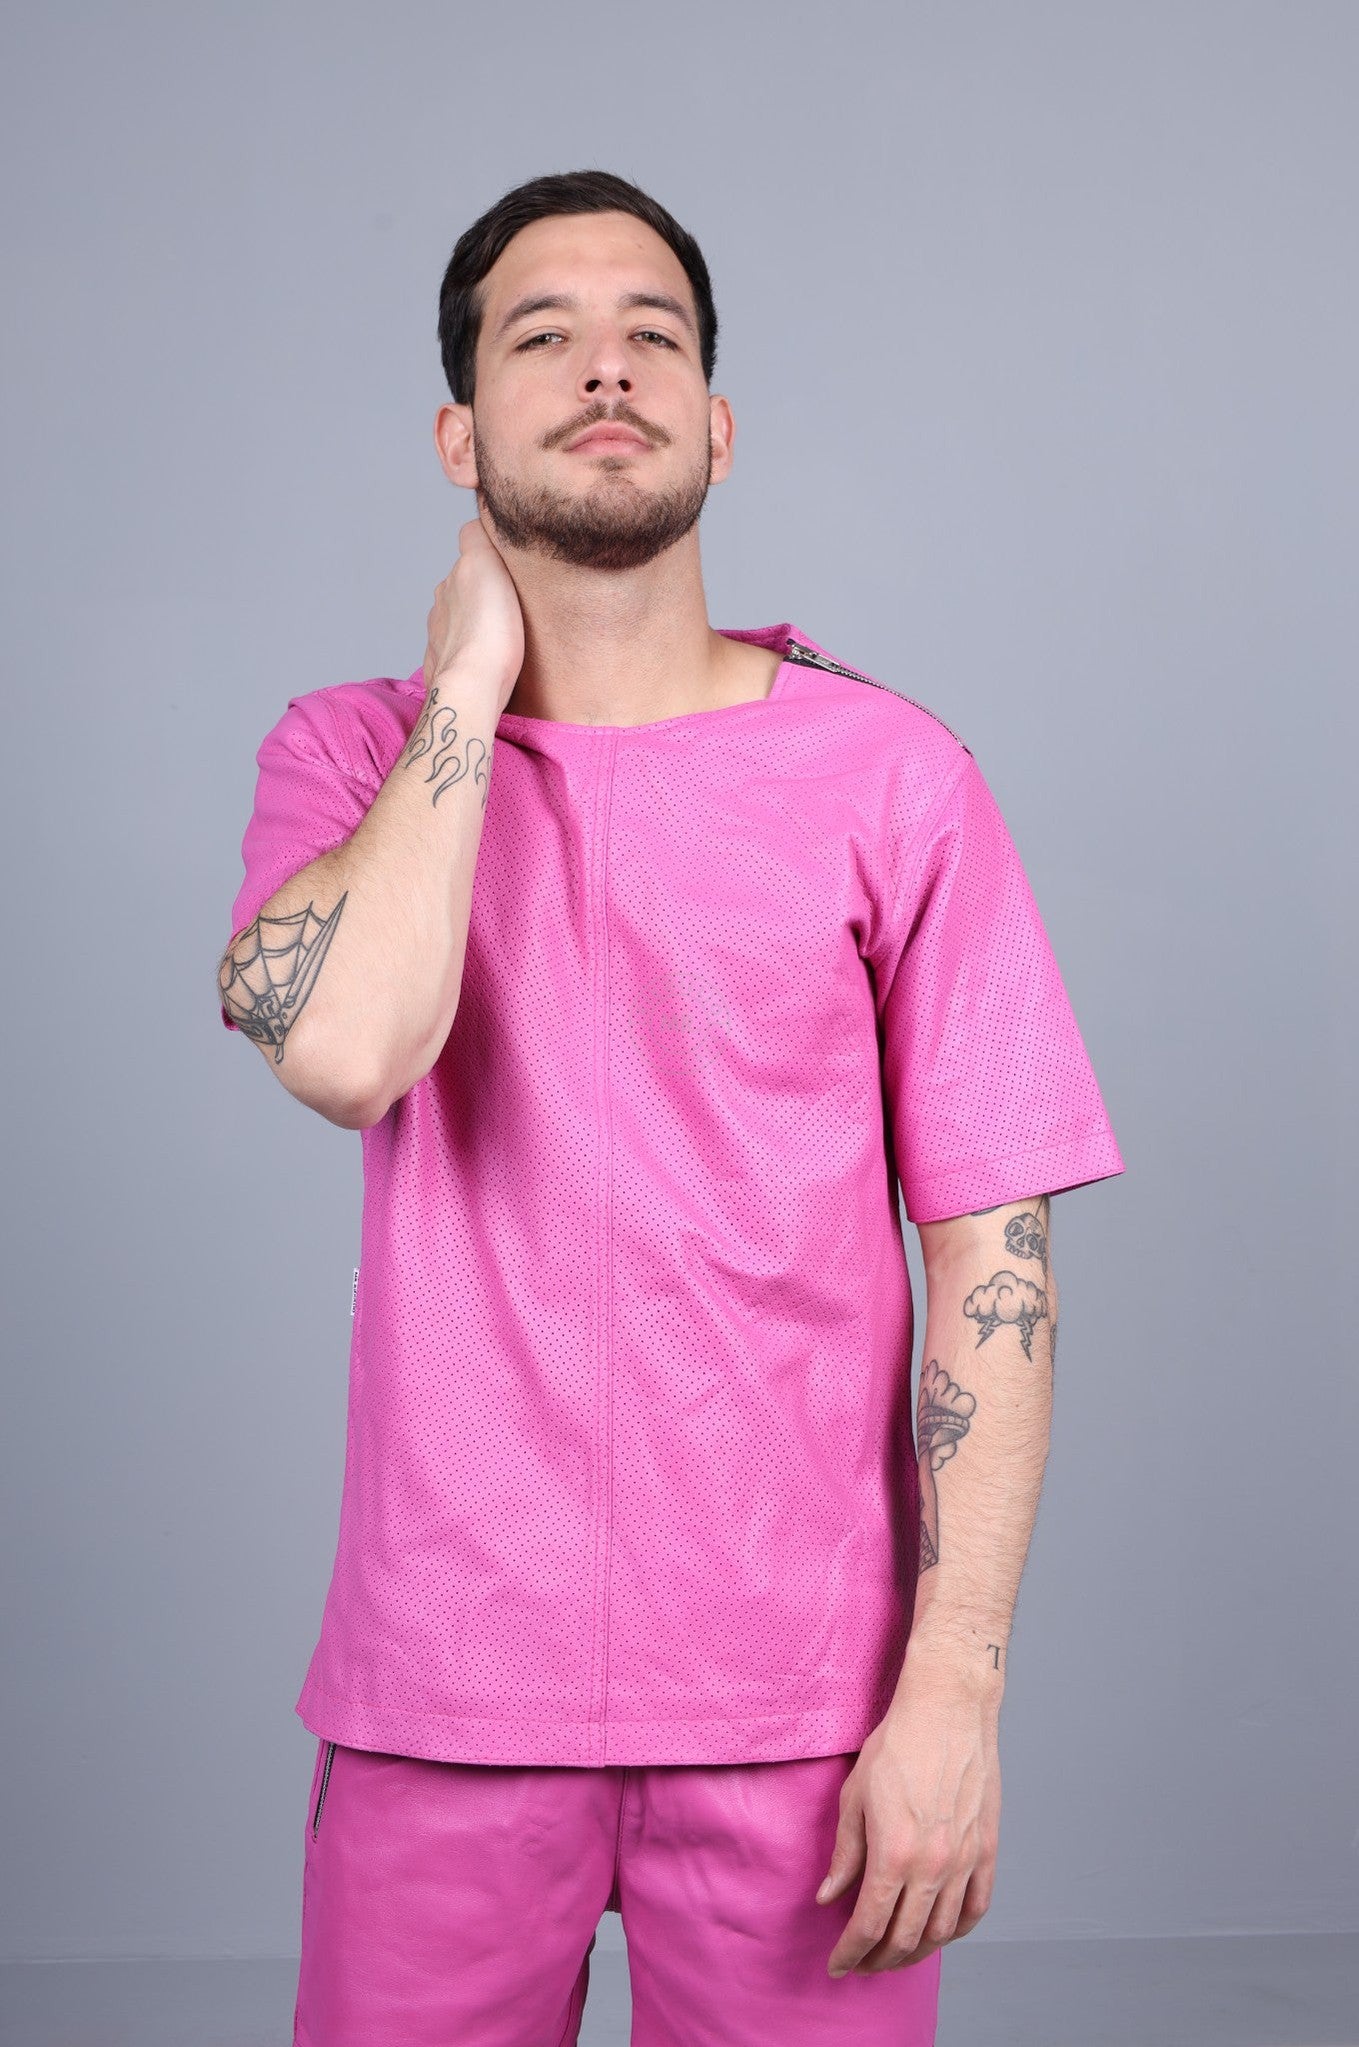 Bright Pink Leather Perforated T-Shirt at MR. Riegillio